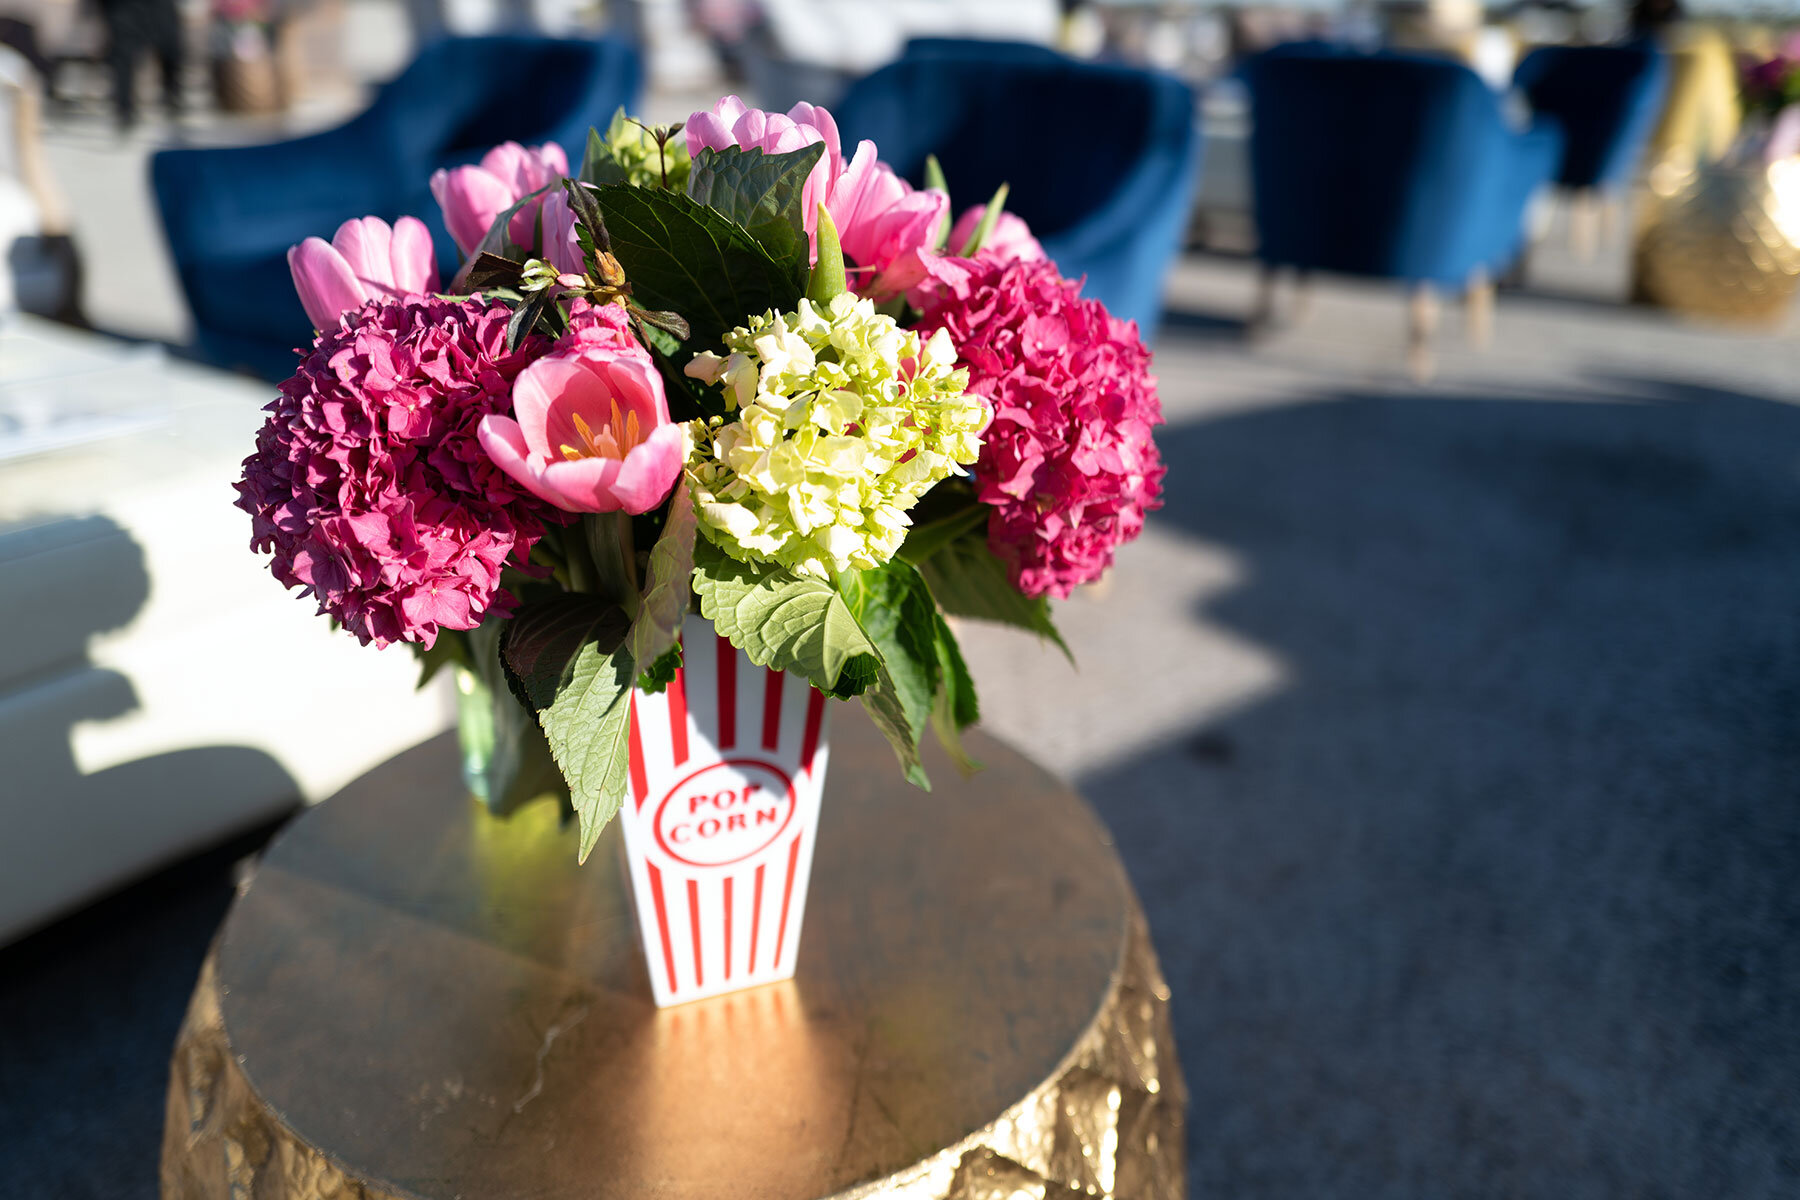  Bergner &amp; Johnson designed floral arrangements in the spirit of a classic drive-in theater /  photo by Daniel Ortiz  